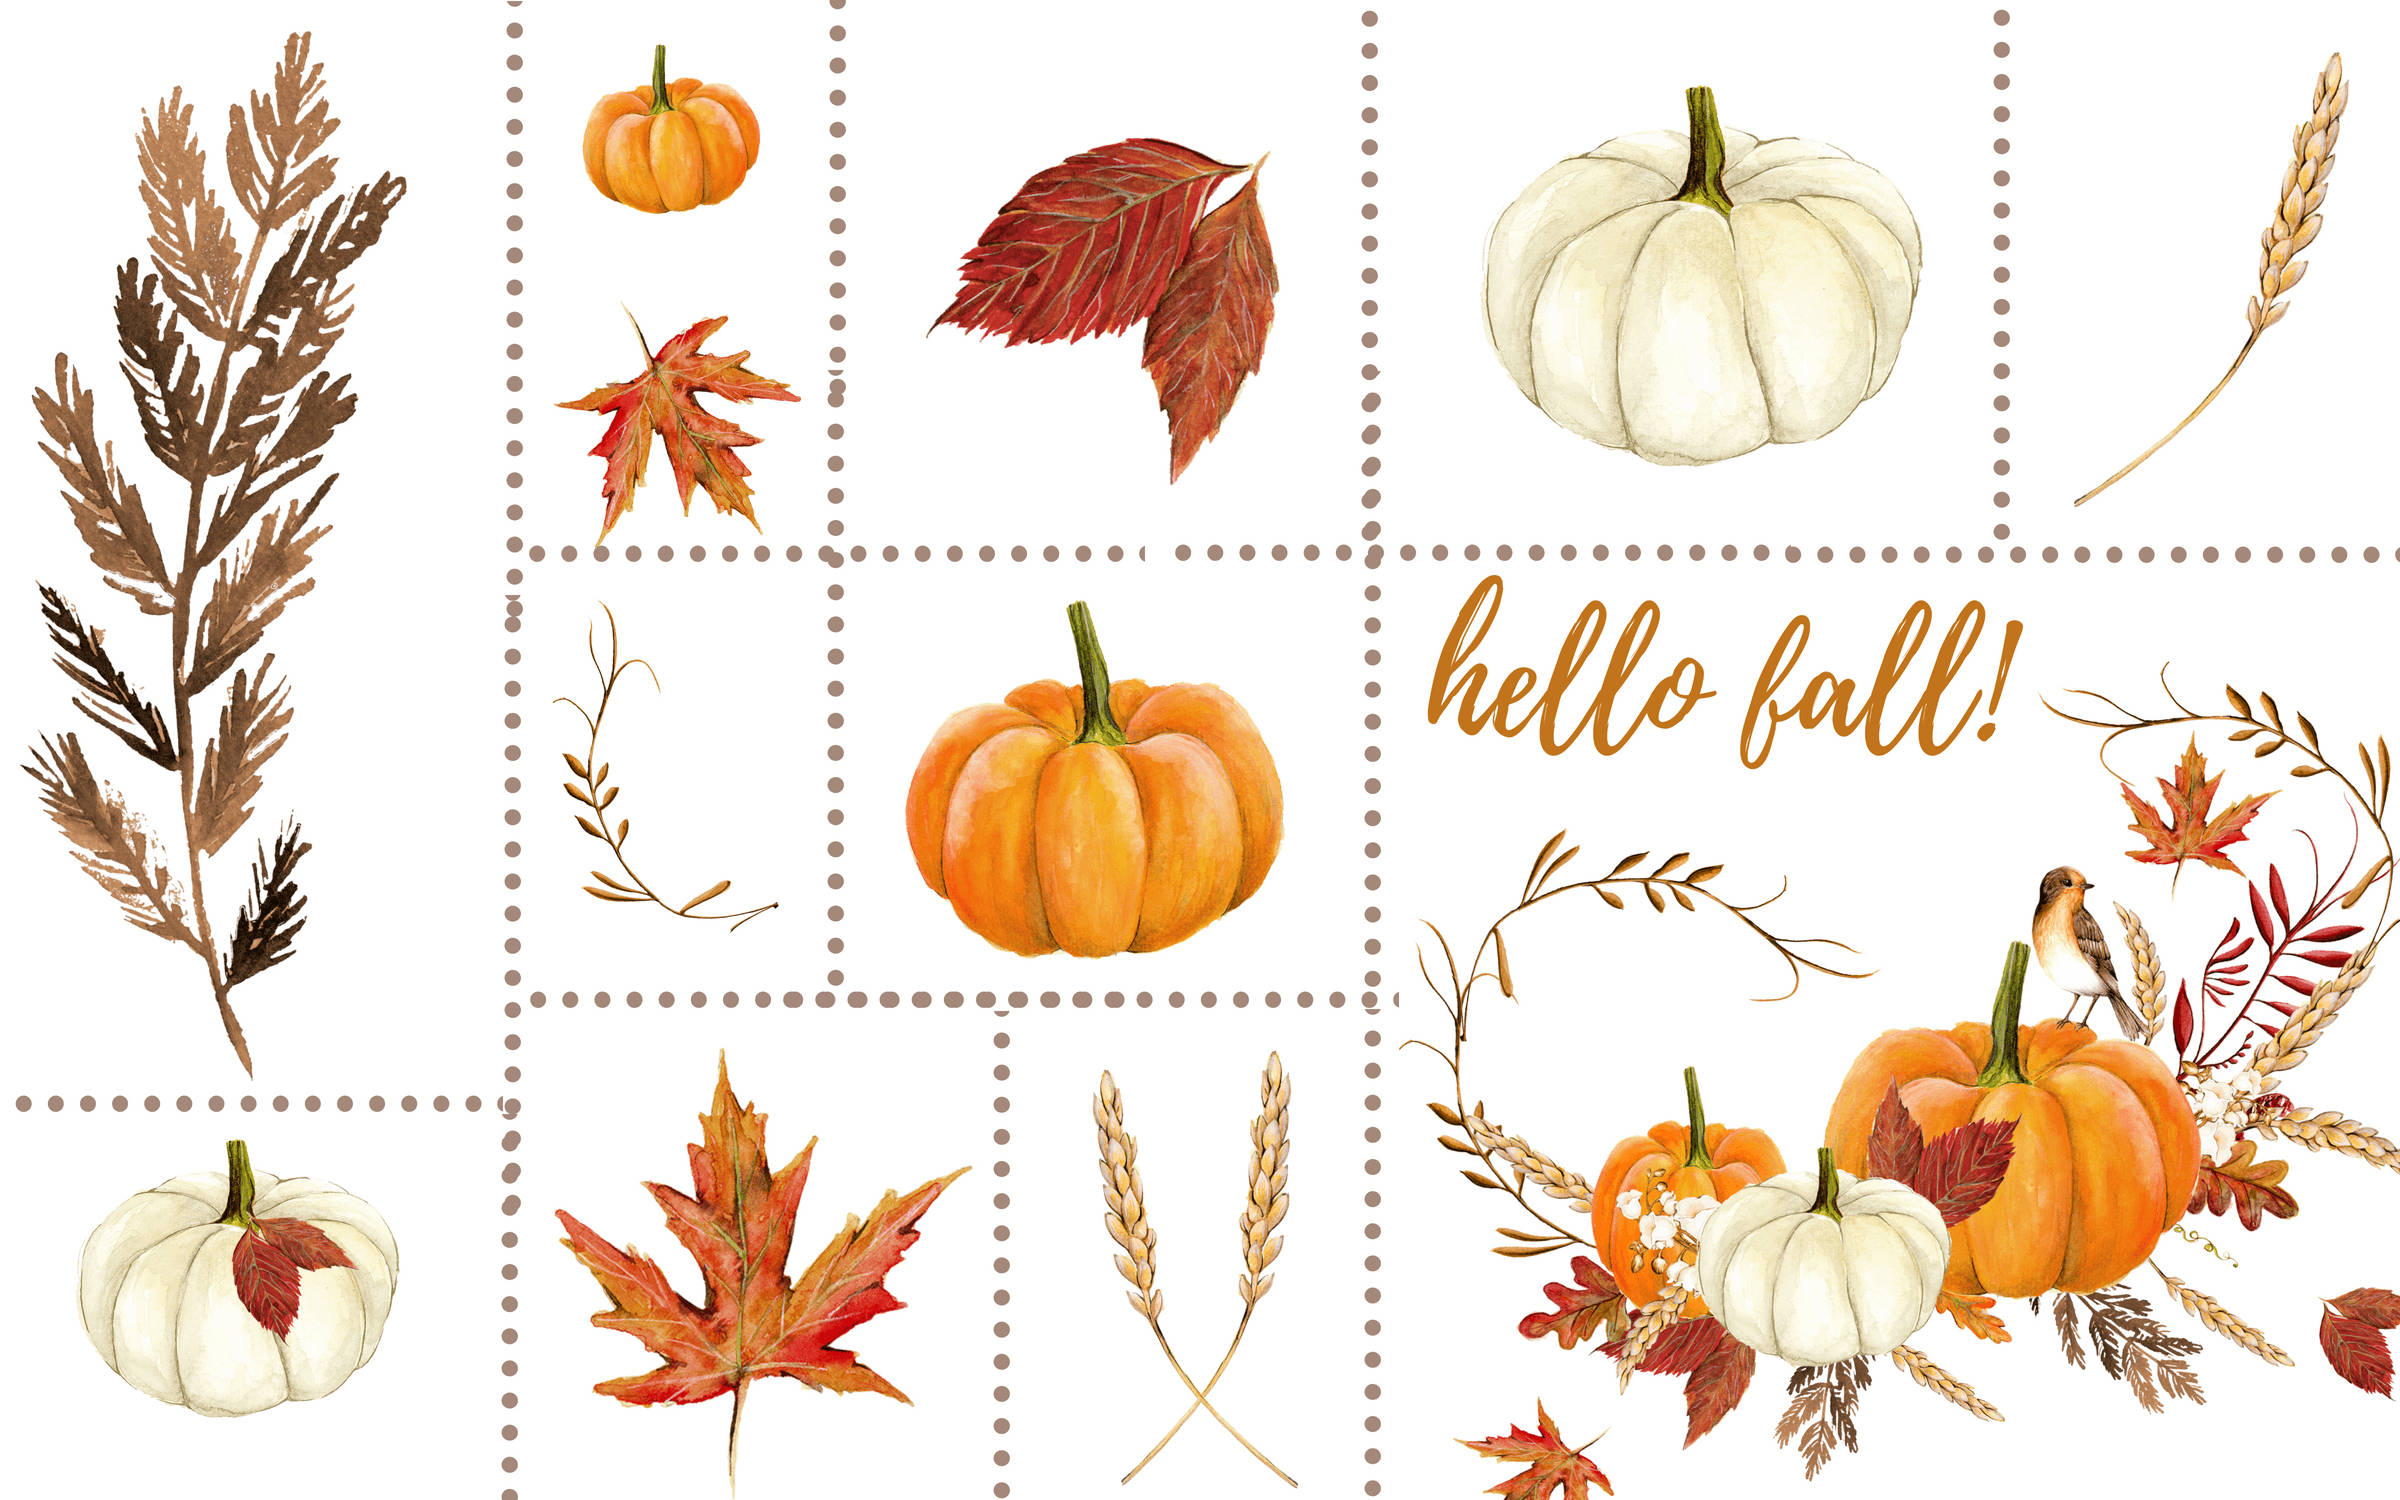 Download Aesthetic Fall Hello Collage Wallpaper